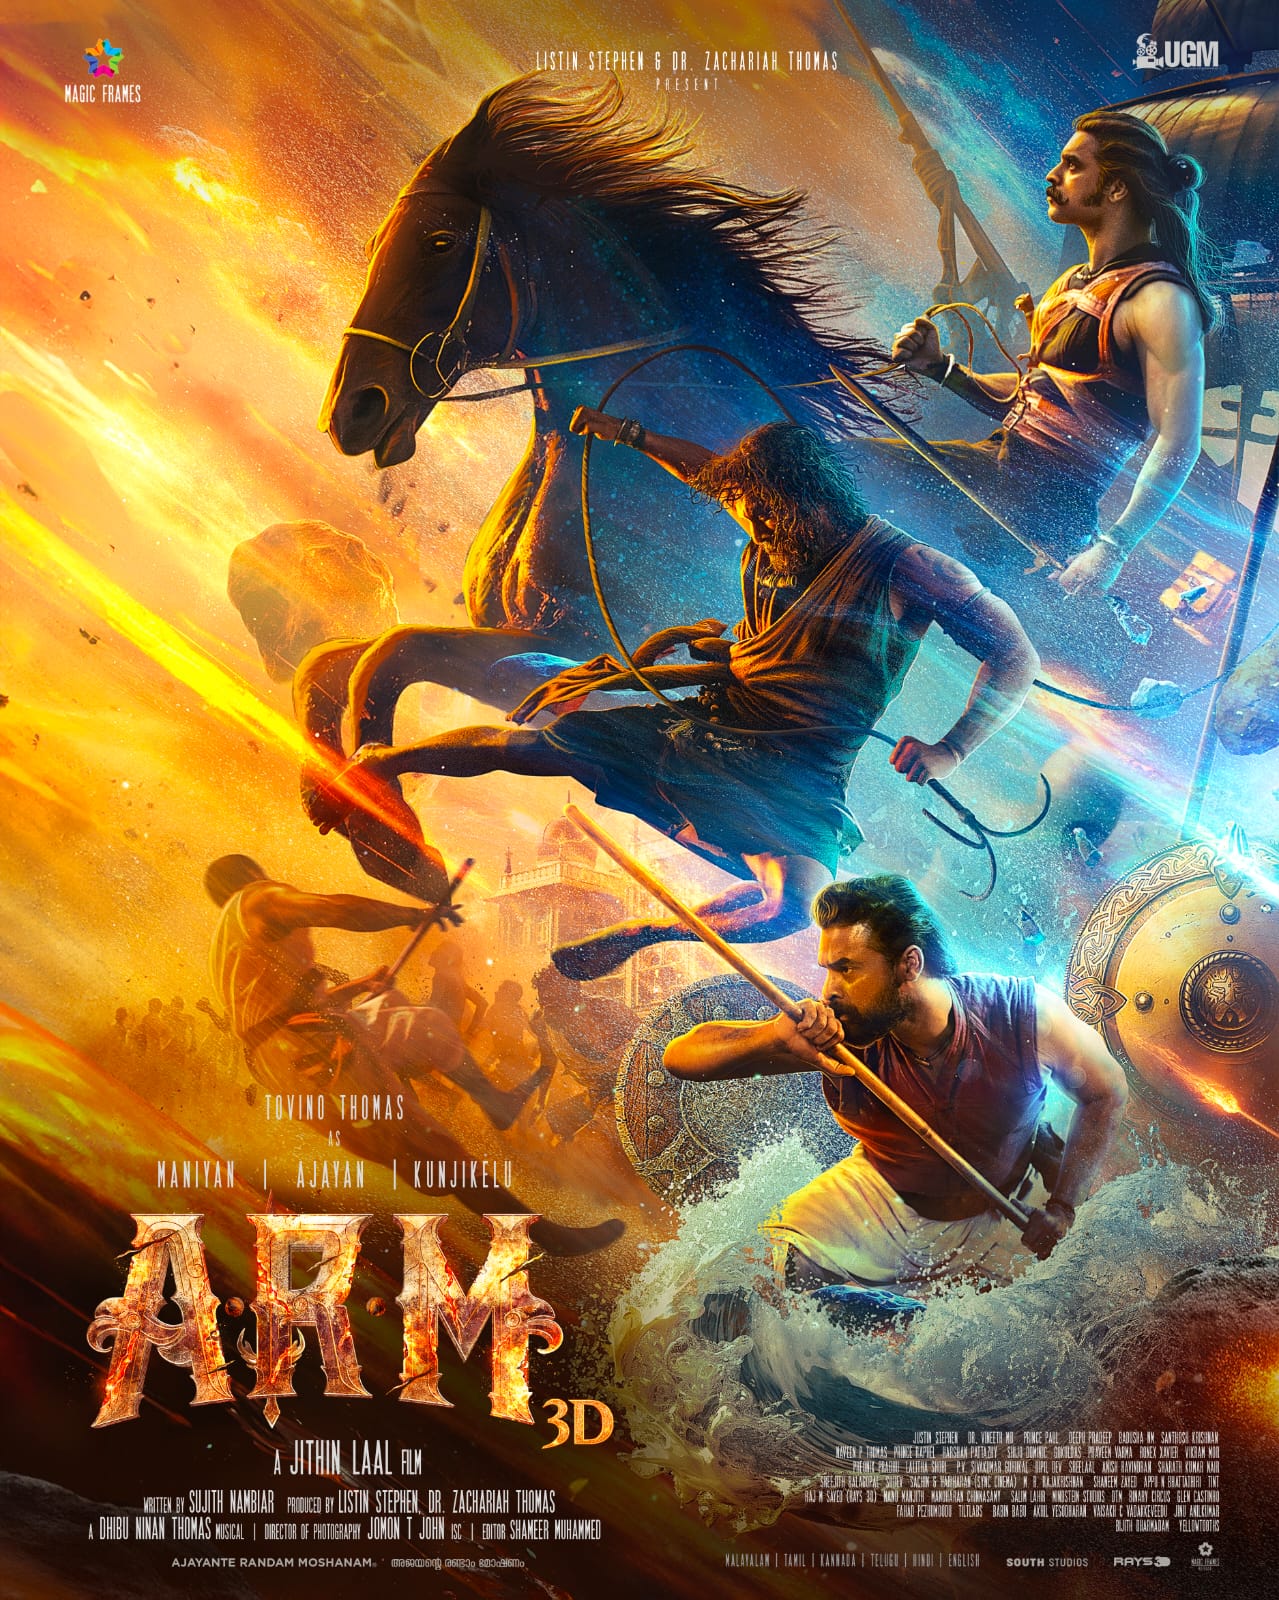 ARM Movie First Look Poster Launched